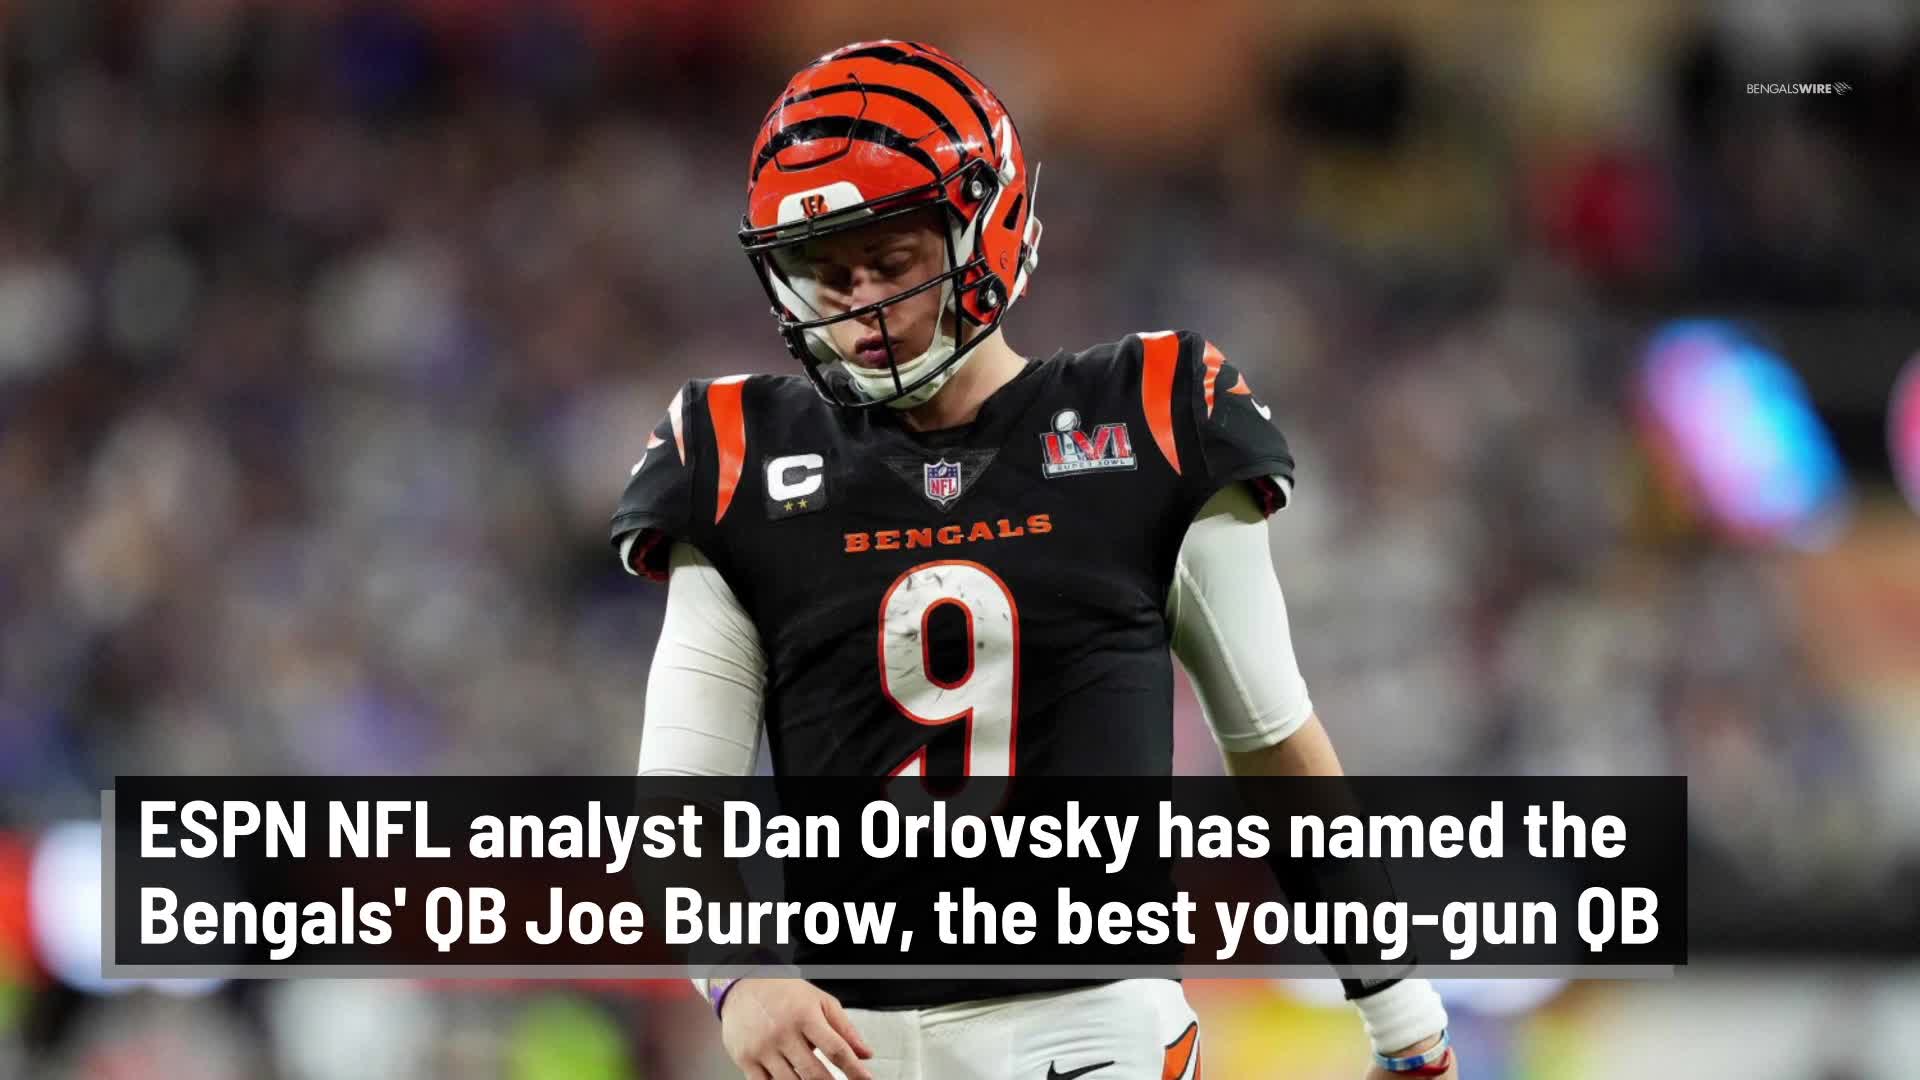 Joe Burrow charts as one of Madden's highest-rated QBs